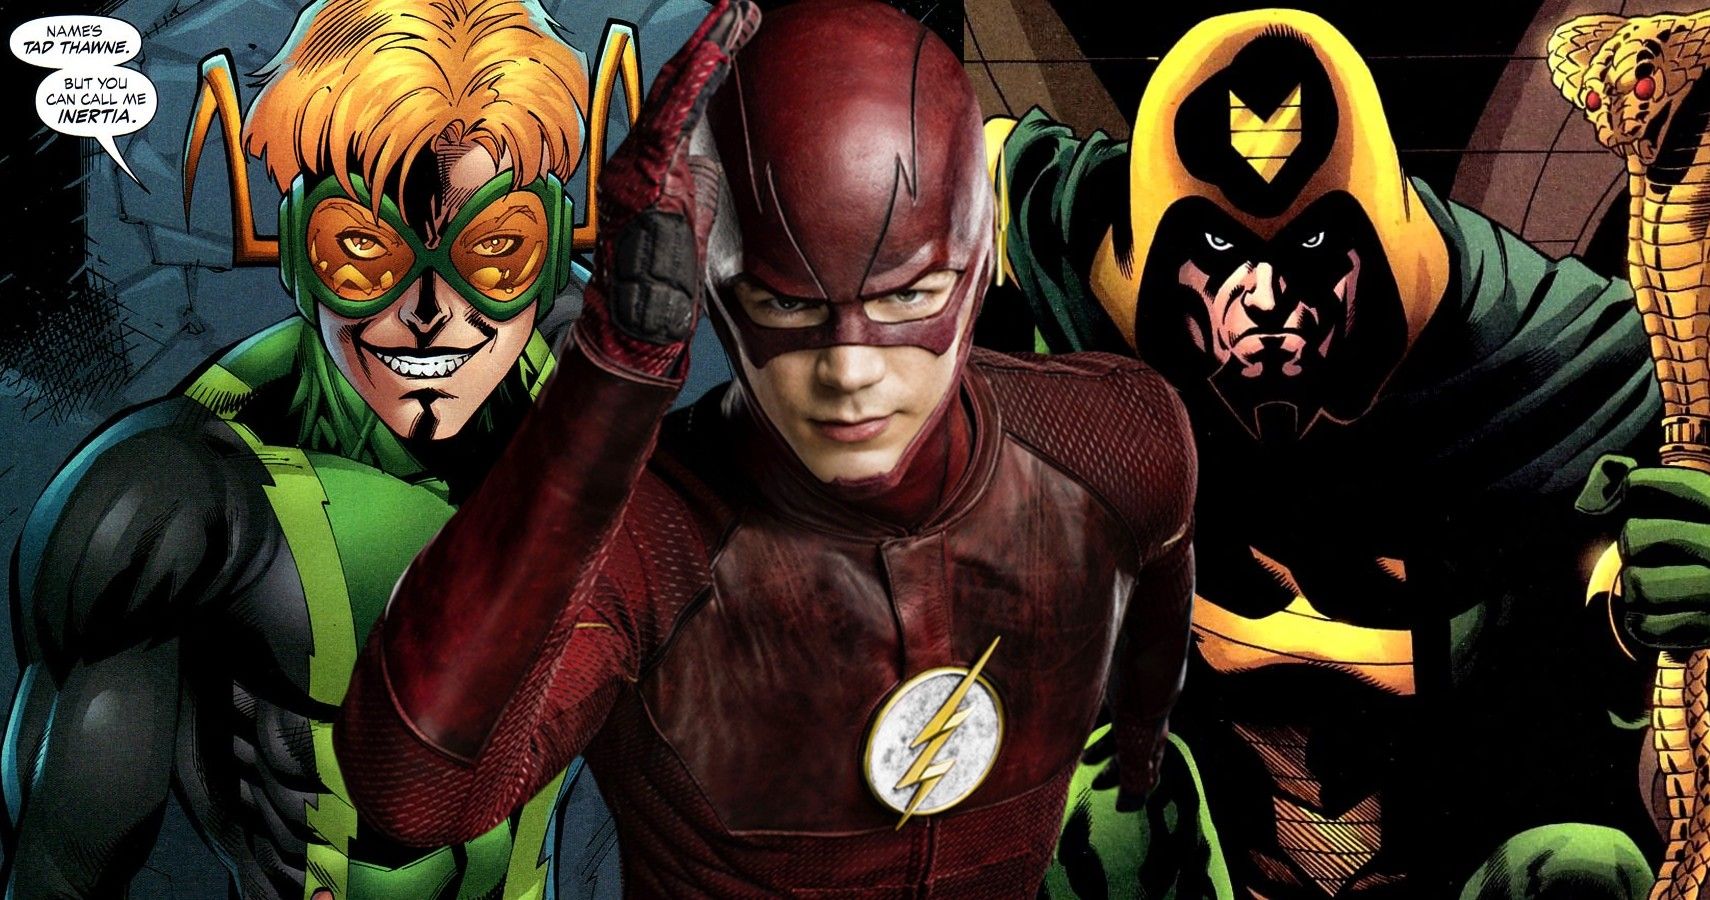 Who Are the Villains in THE FLASH? - Nerdist